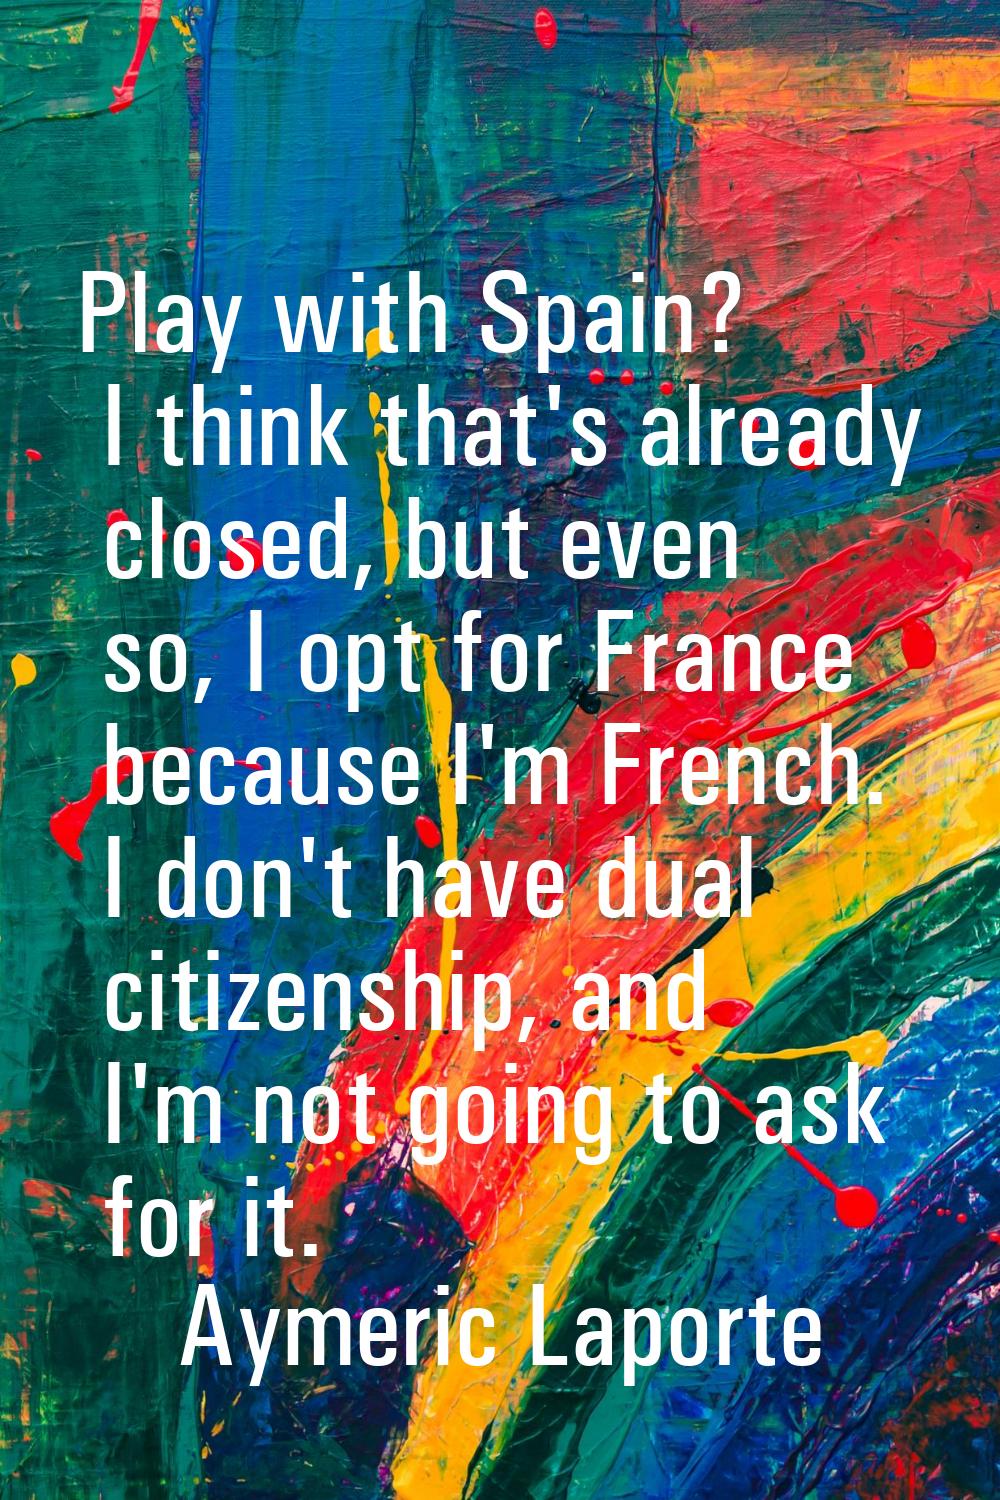 Play with Spain? I think that's already closed, but even so, I opt for France because I'm French. I